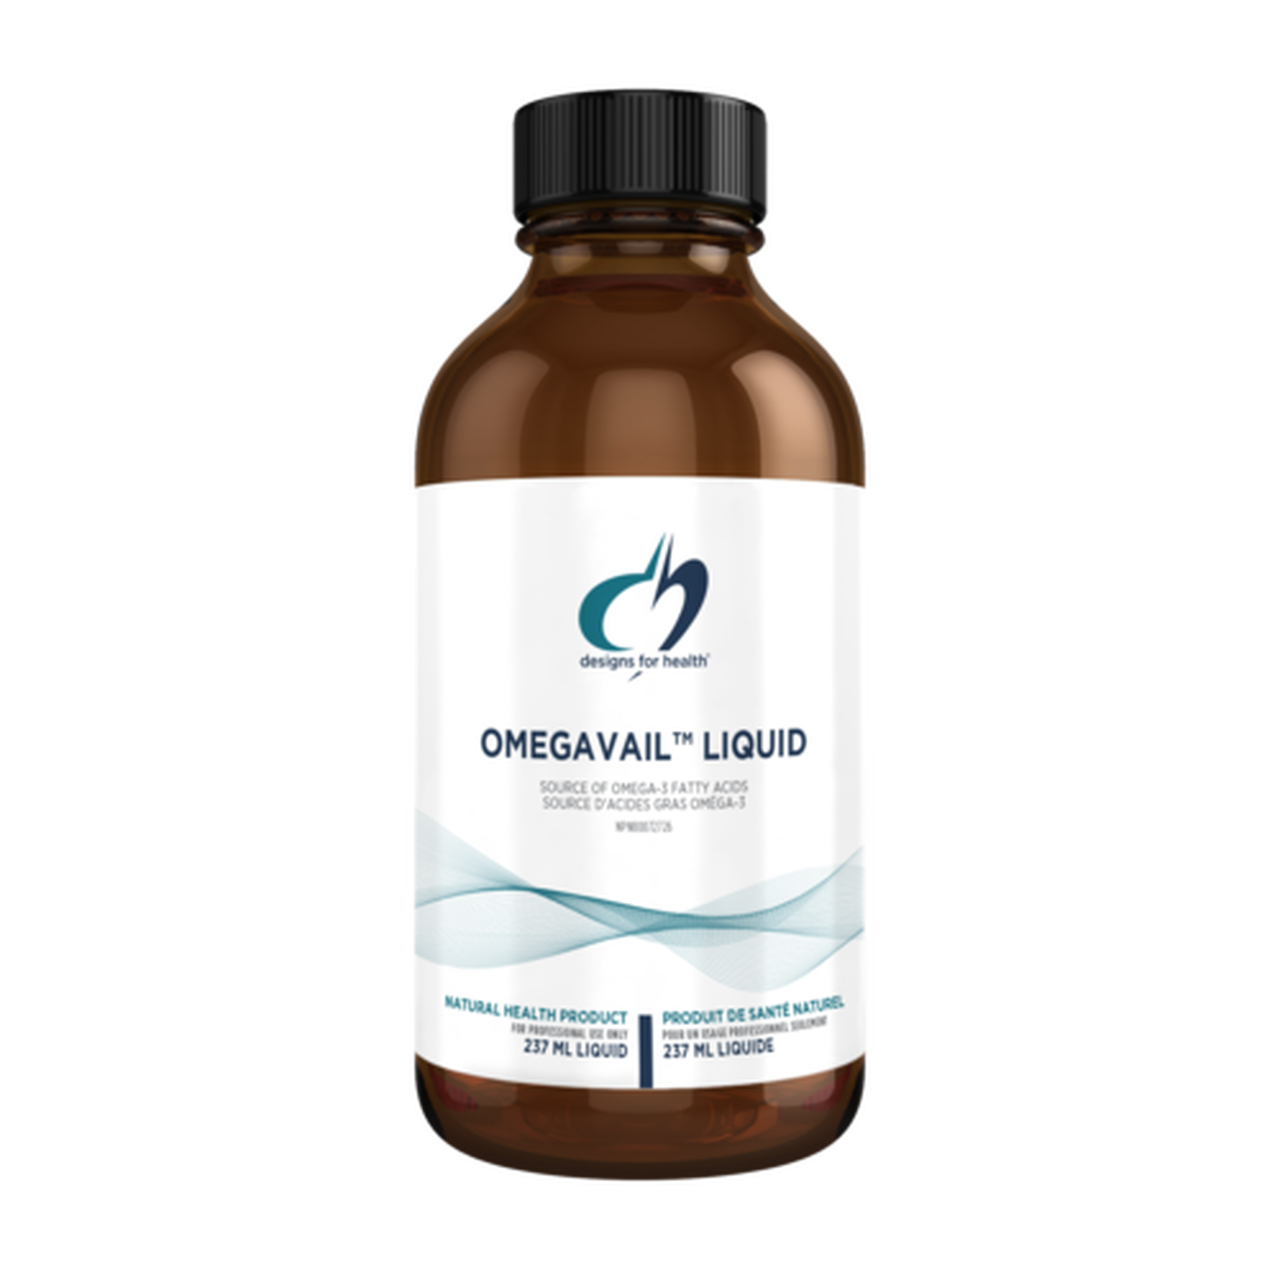 OmegAvail™ Liquid by Designs for Health